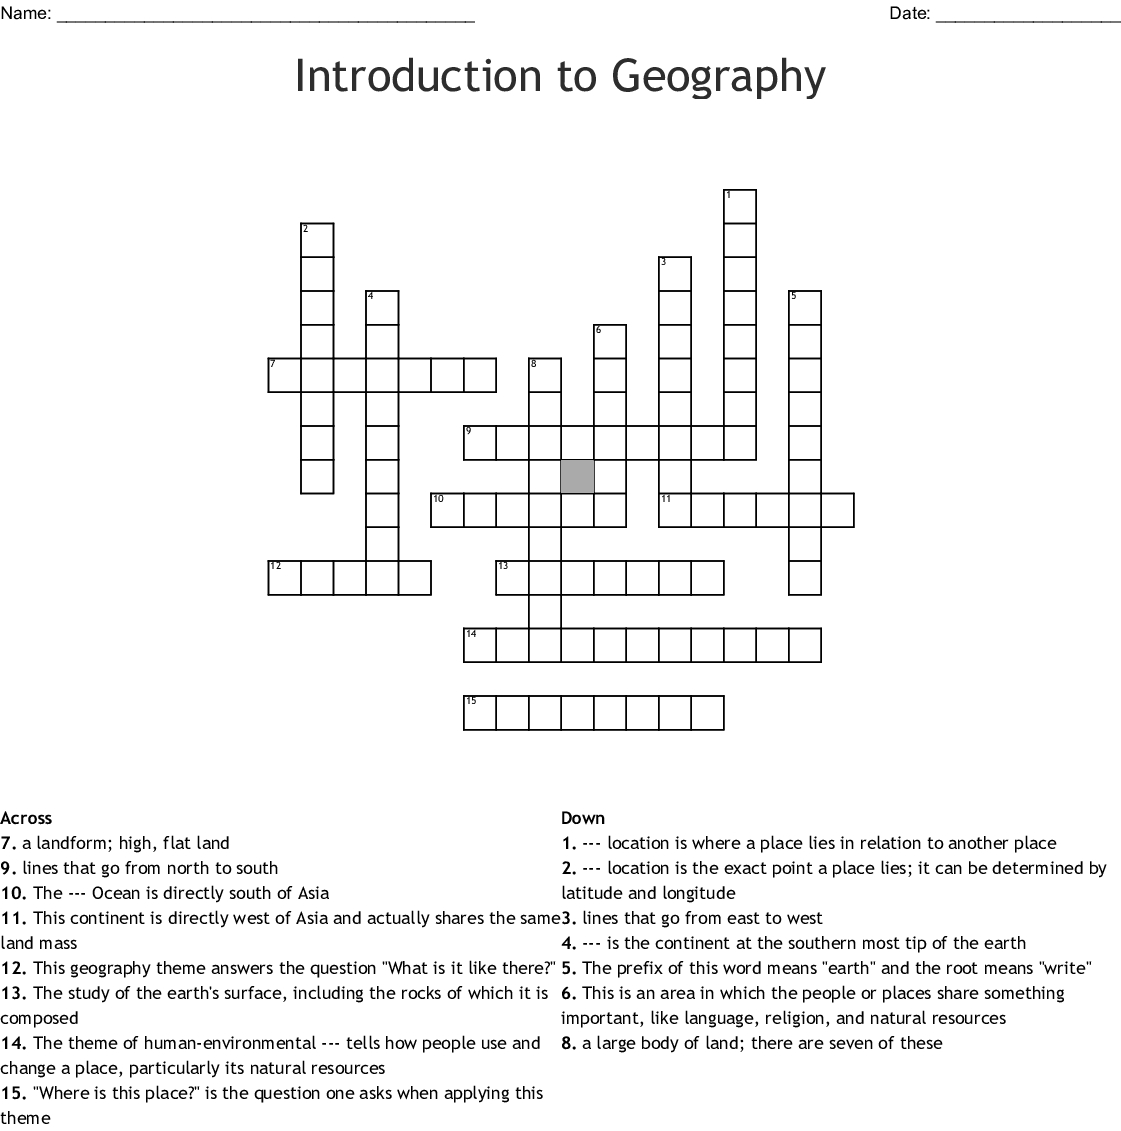 Us Geography Crossword Puzzle Printable